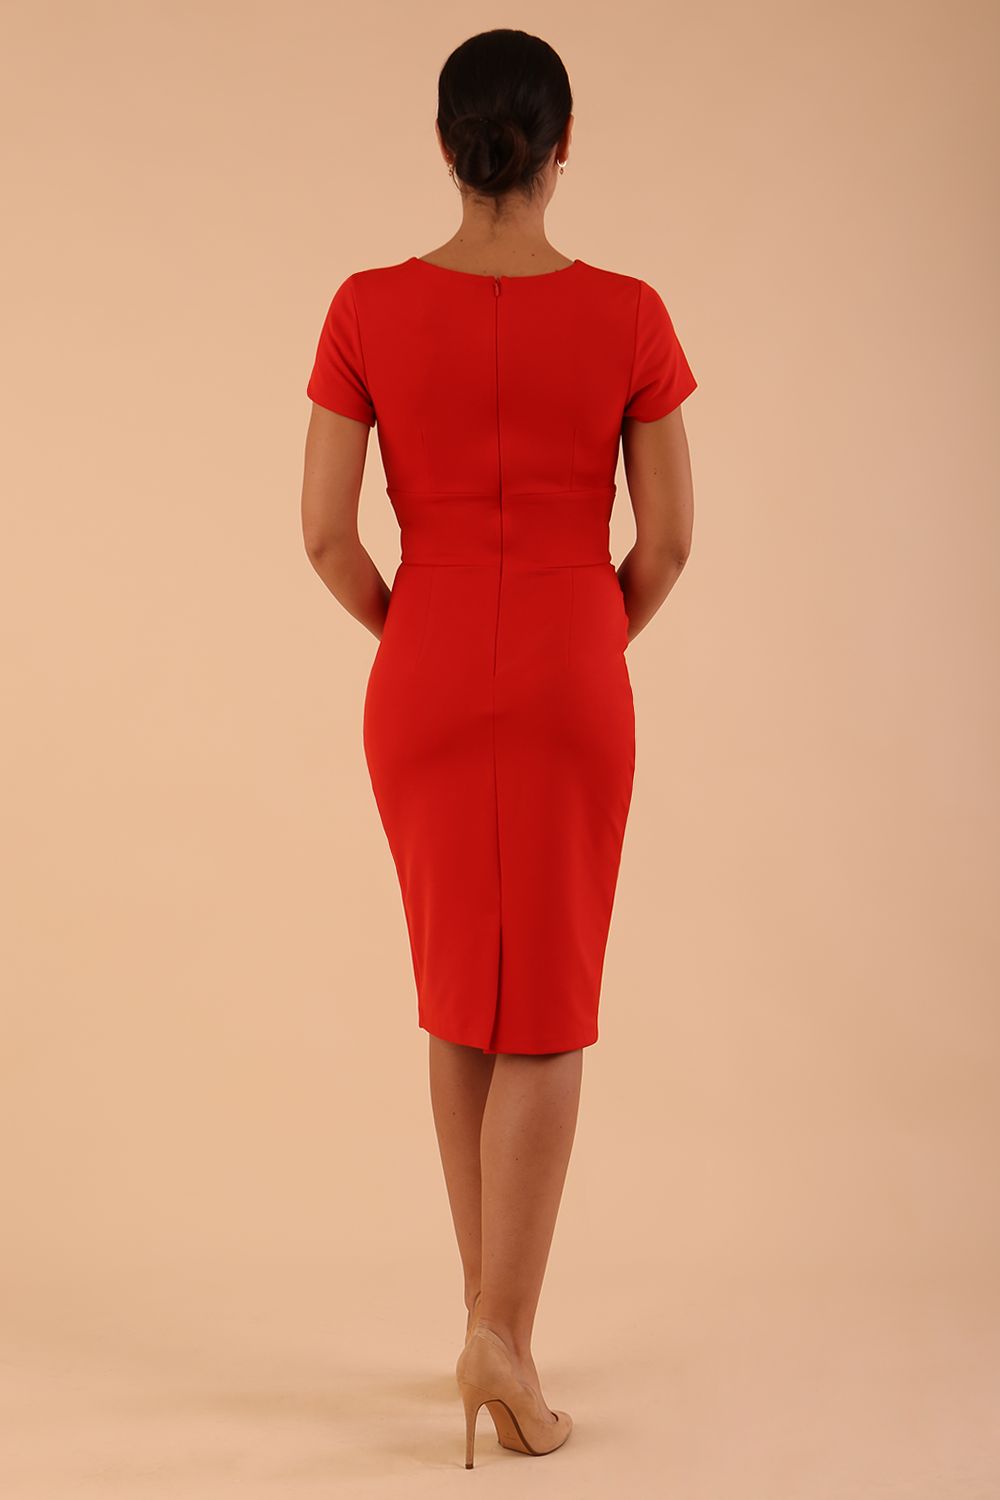 Model wearing Diva Catwalk Donna Short Sleeve Pencil Dress with a wide band and pleating across the tummy area in Burnt Orange back